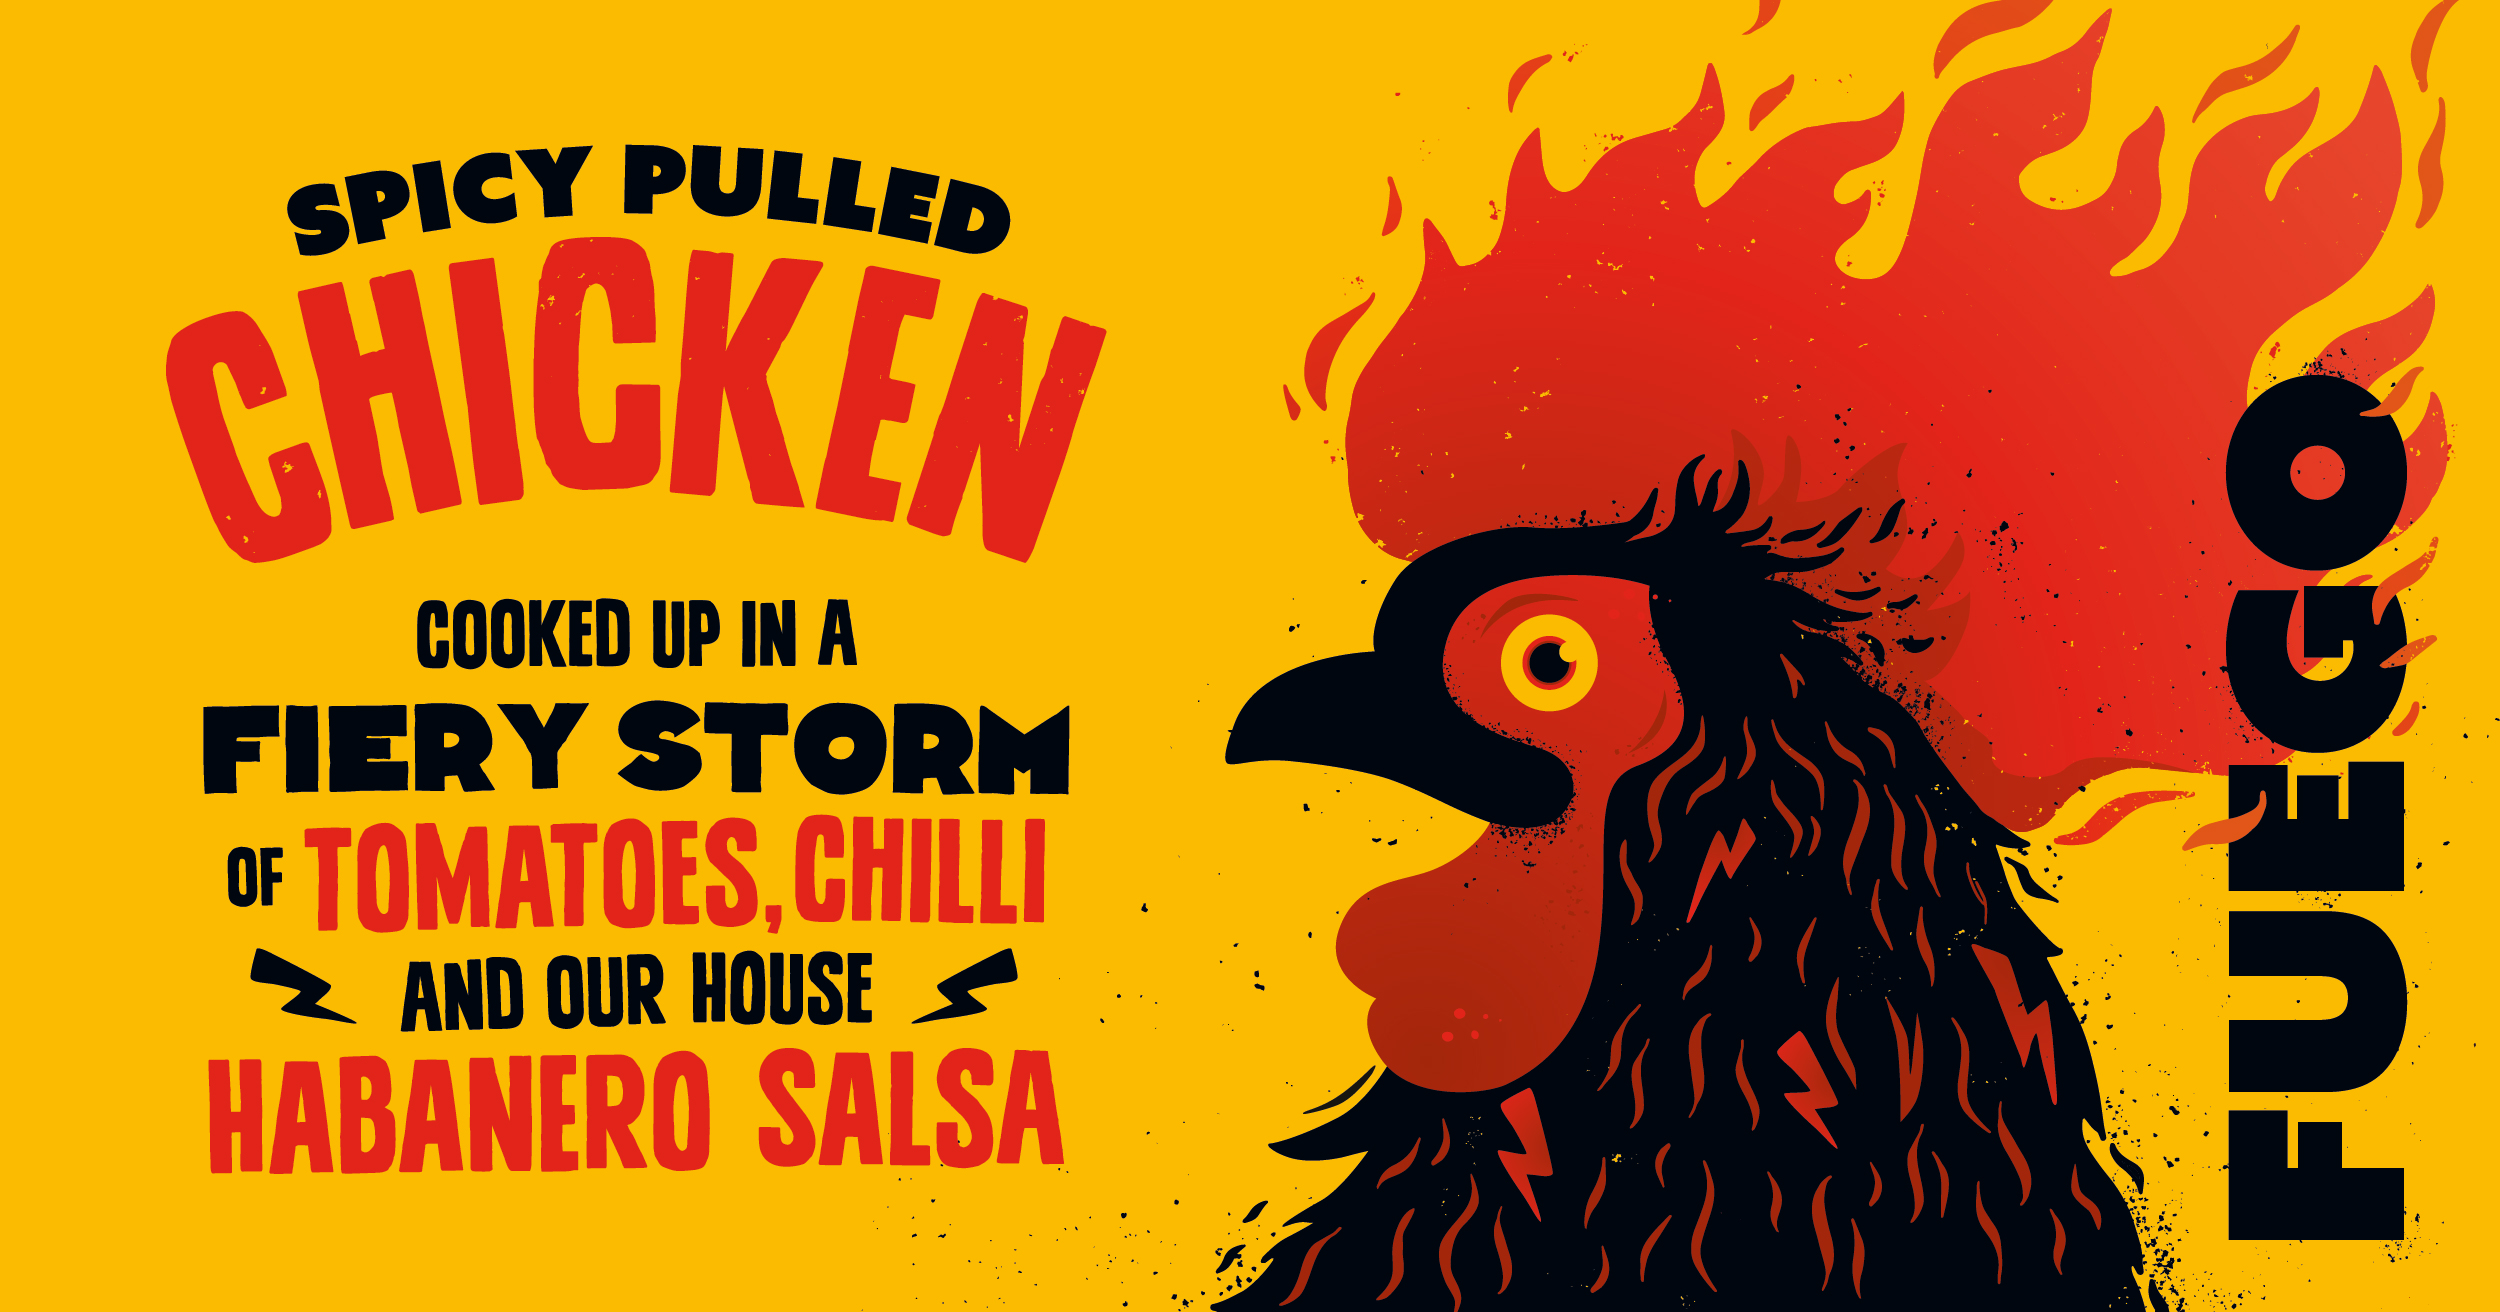 Fuego chicken is hot right now